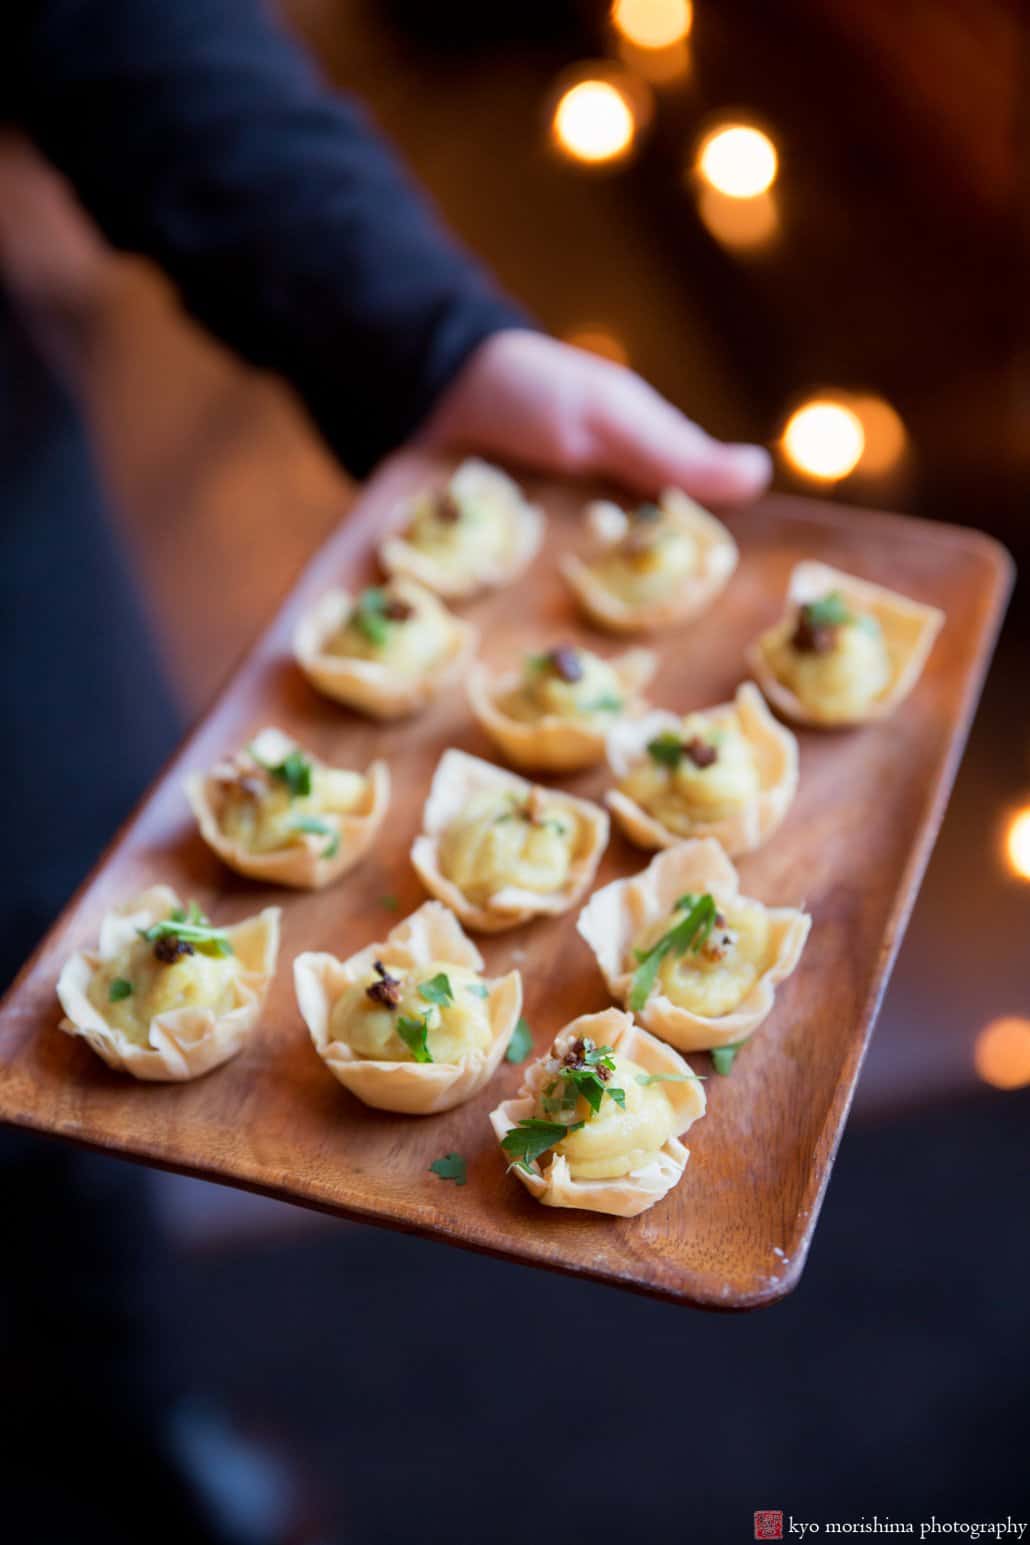 Pastry hors d'oeuvres by The Night Kitchen Catering at Green Building wedding, photographed by Kyo Morishima